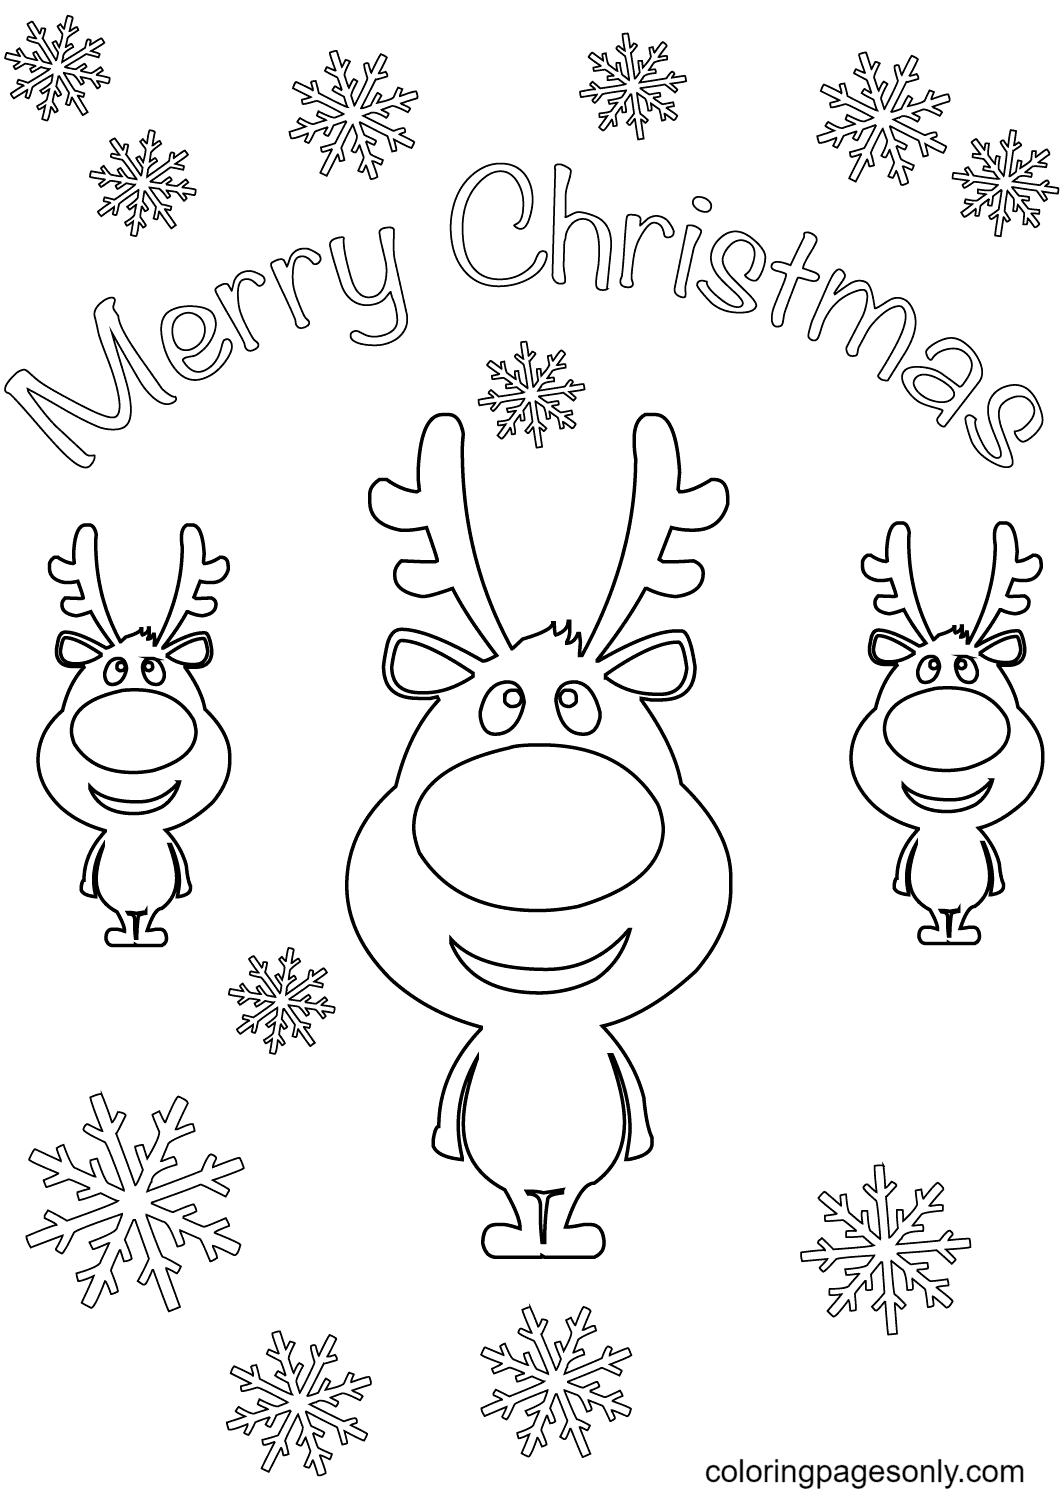 Merry Christmas Card with Cartoon Reindeers Coloring Page